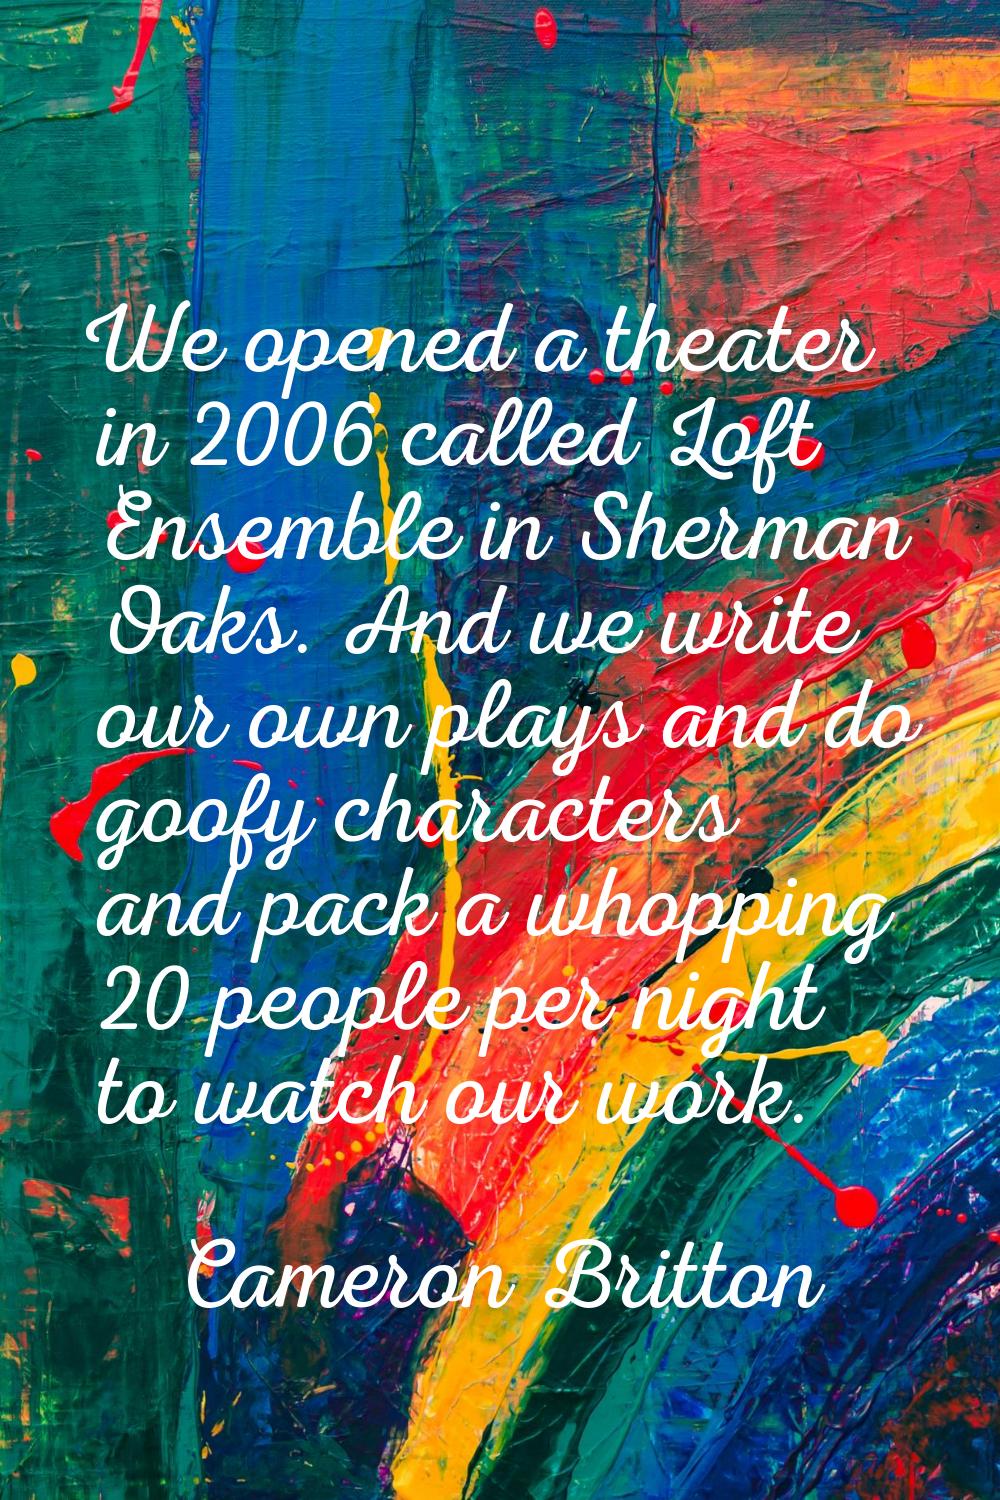 We opened a theater in 2006 called Loft Ensemble in Sherman Oaks. And we write our own plays and do